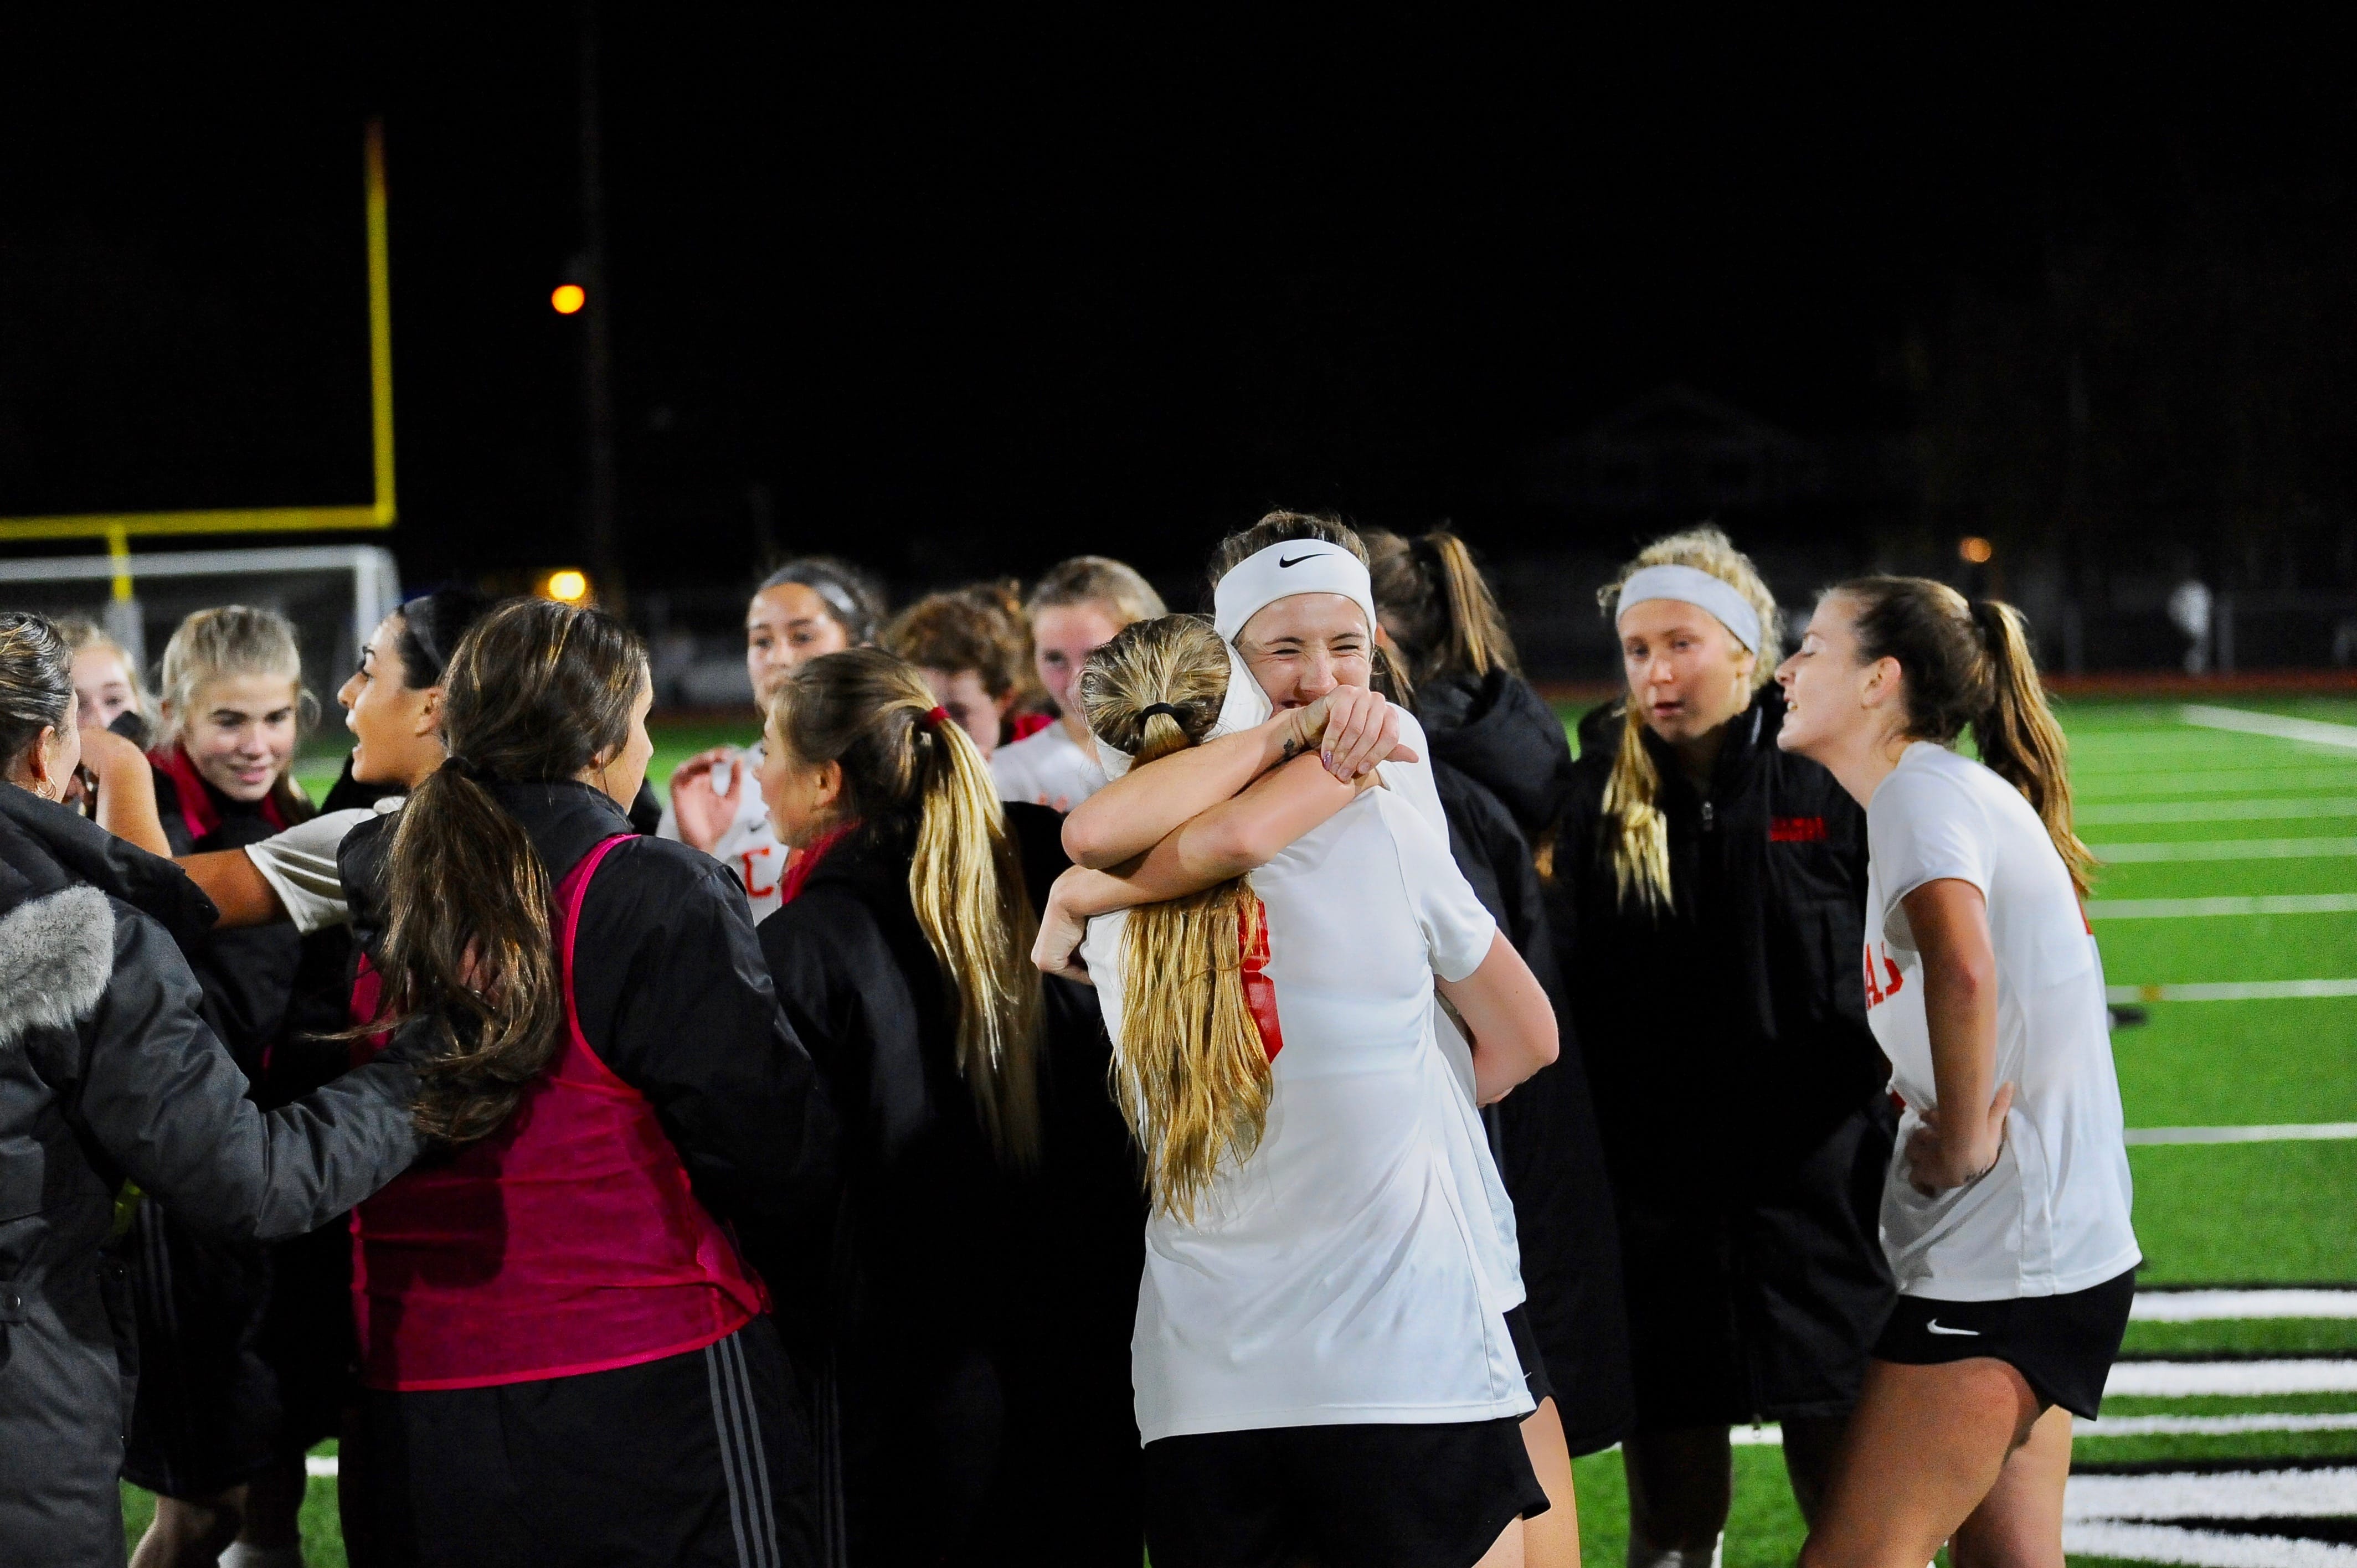 Epic comeback lands Camas girls soccer in 4A state alt - The